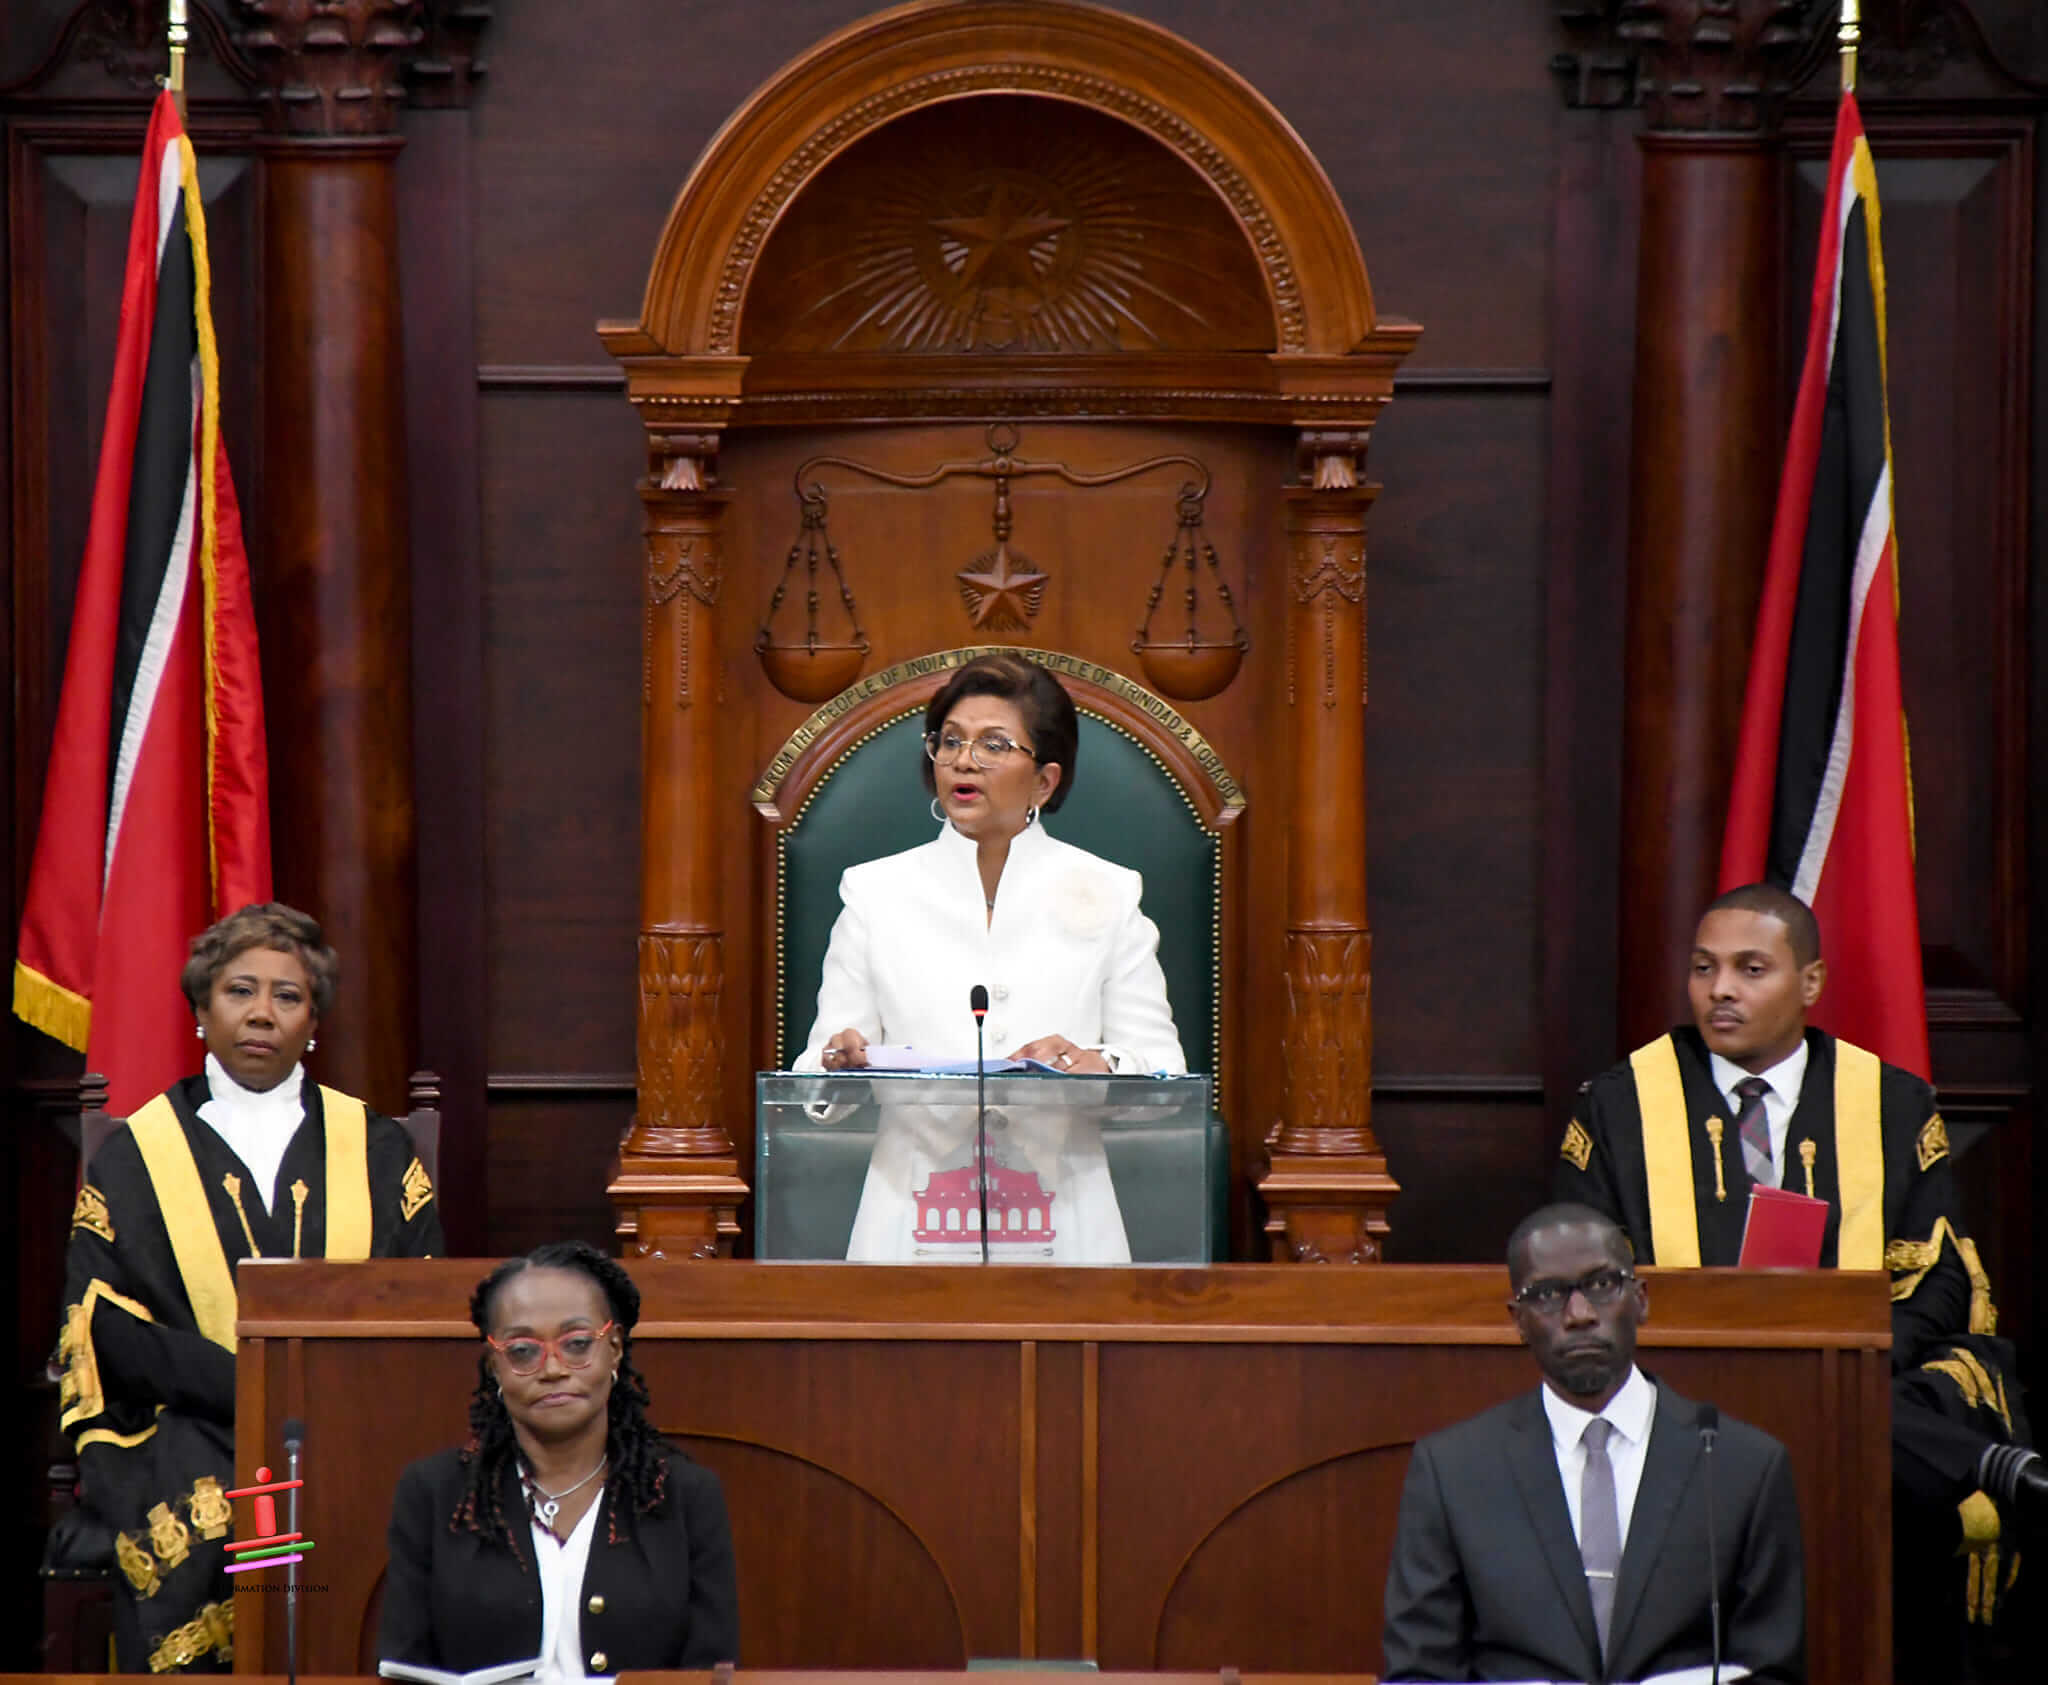 Her Excellency Addresses the Ceremonial Opening of the Fourth Session of the Twelfth Parliament of the Republic of Trinidad and Tobago